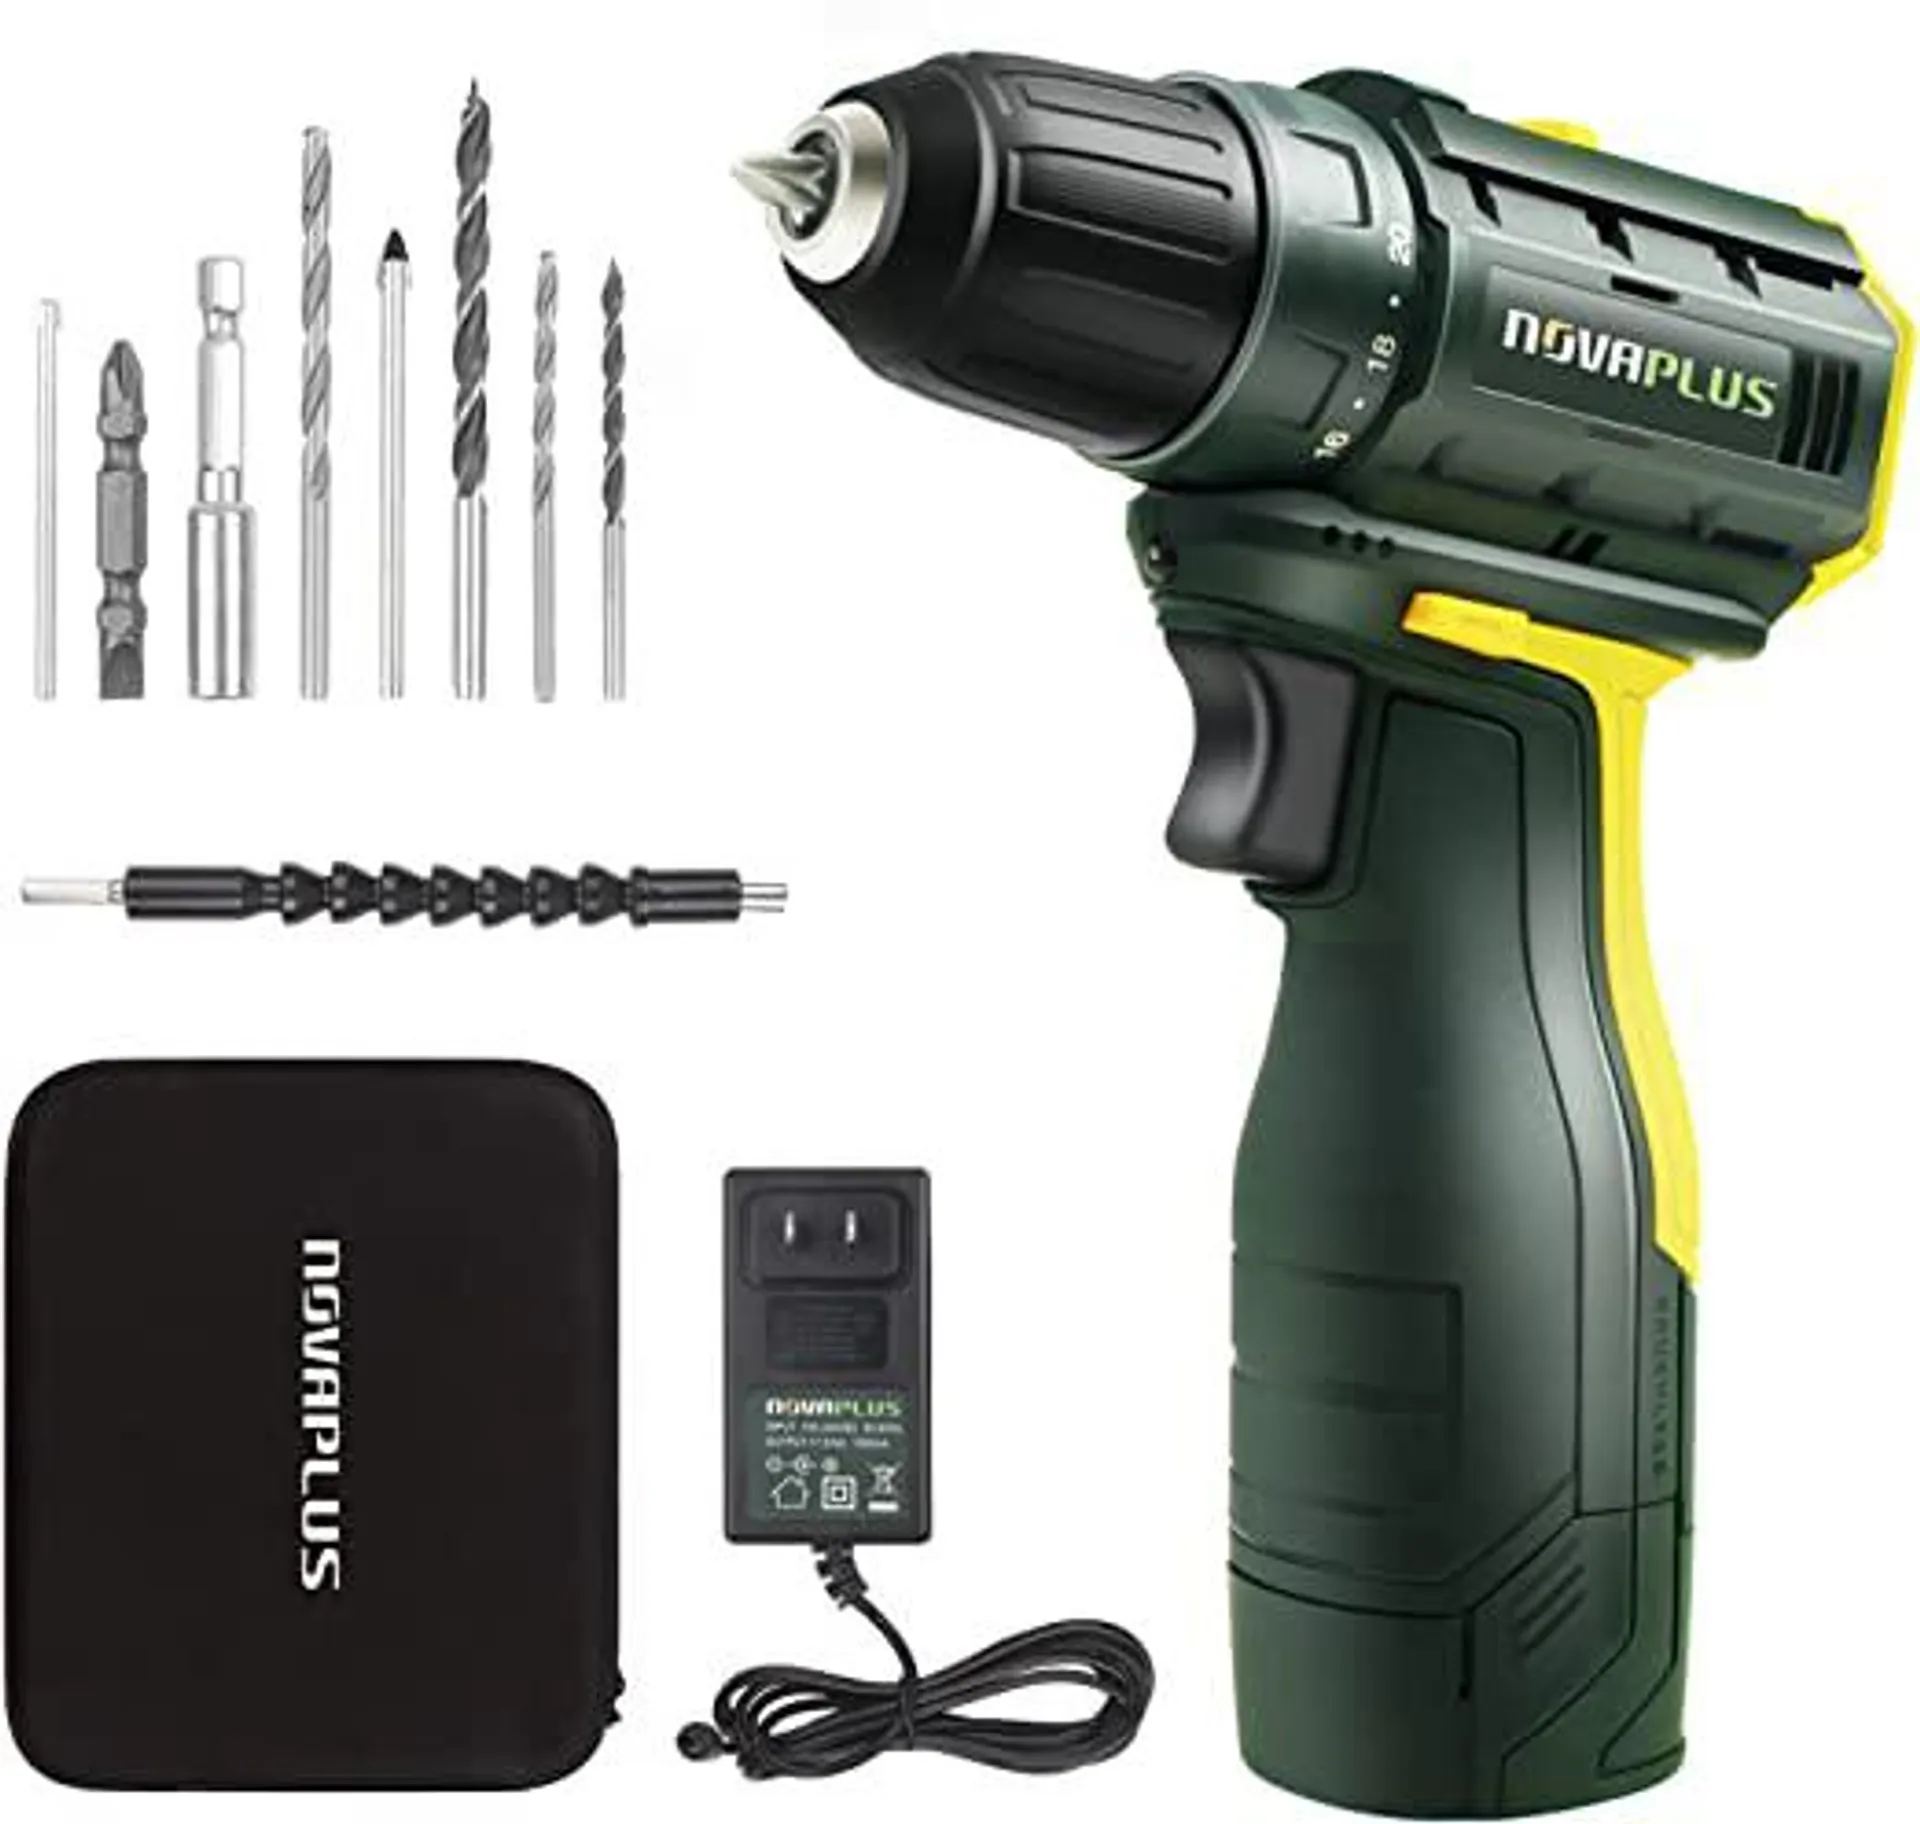 NOVAPLUS Cordless Drill Set, Brushless Power Drill Kit with Fast Charger, 3/8'' Keyless Chuck and Variable Speed, Your Home Repairing Tool